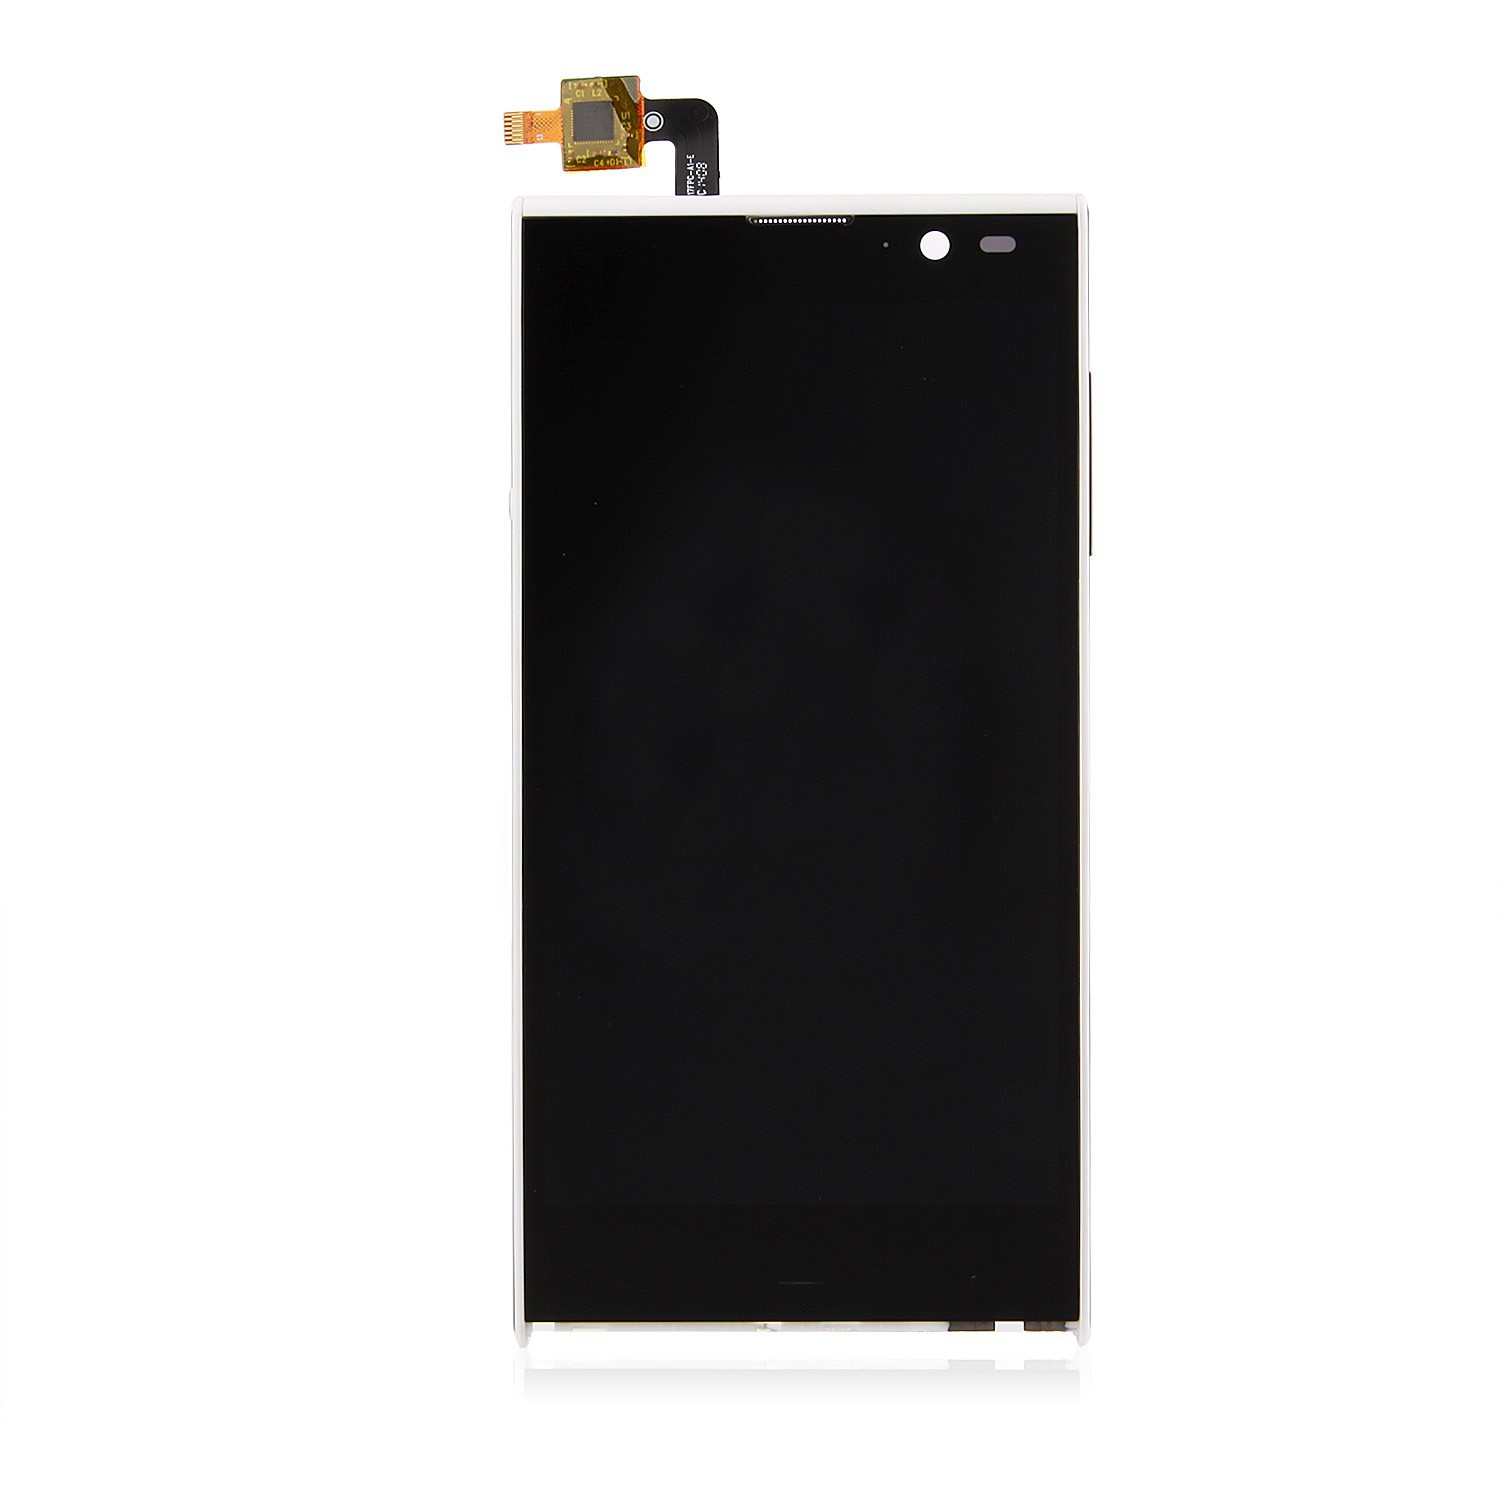 Sony tab and tablet Display Repair and Replacement In Chennai